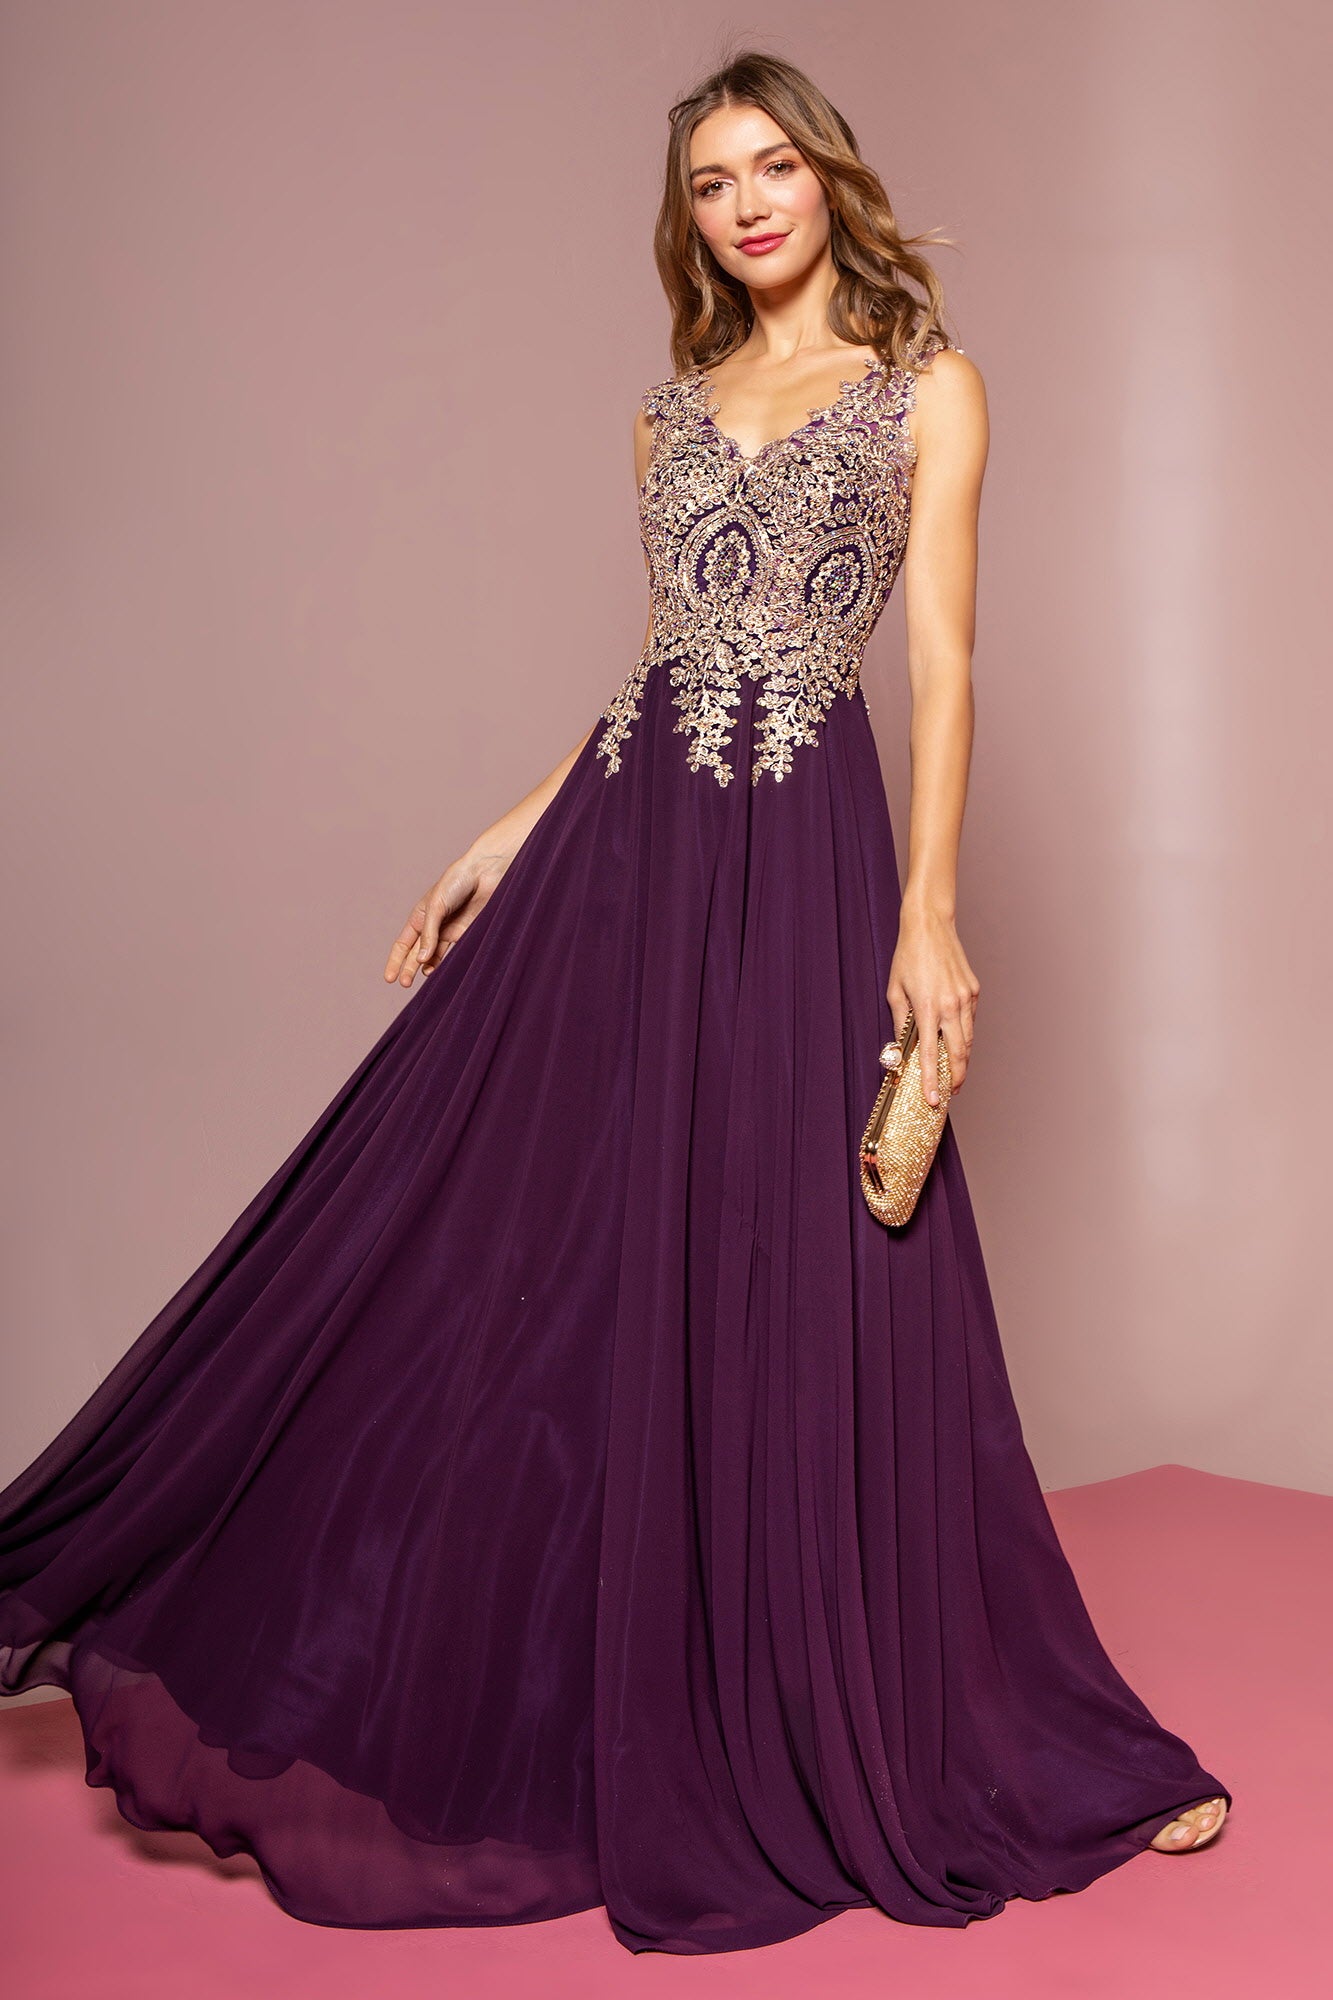 Embroidered Chiffon Long Prom Dress Formal - The Dress Outlet Eggplant